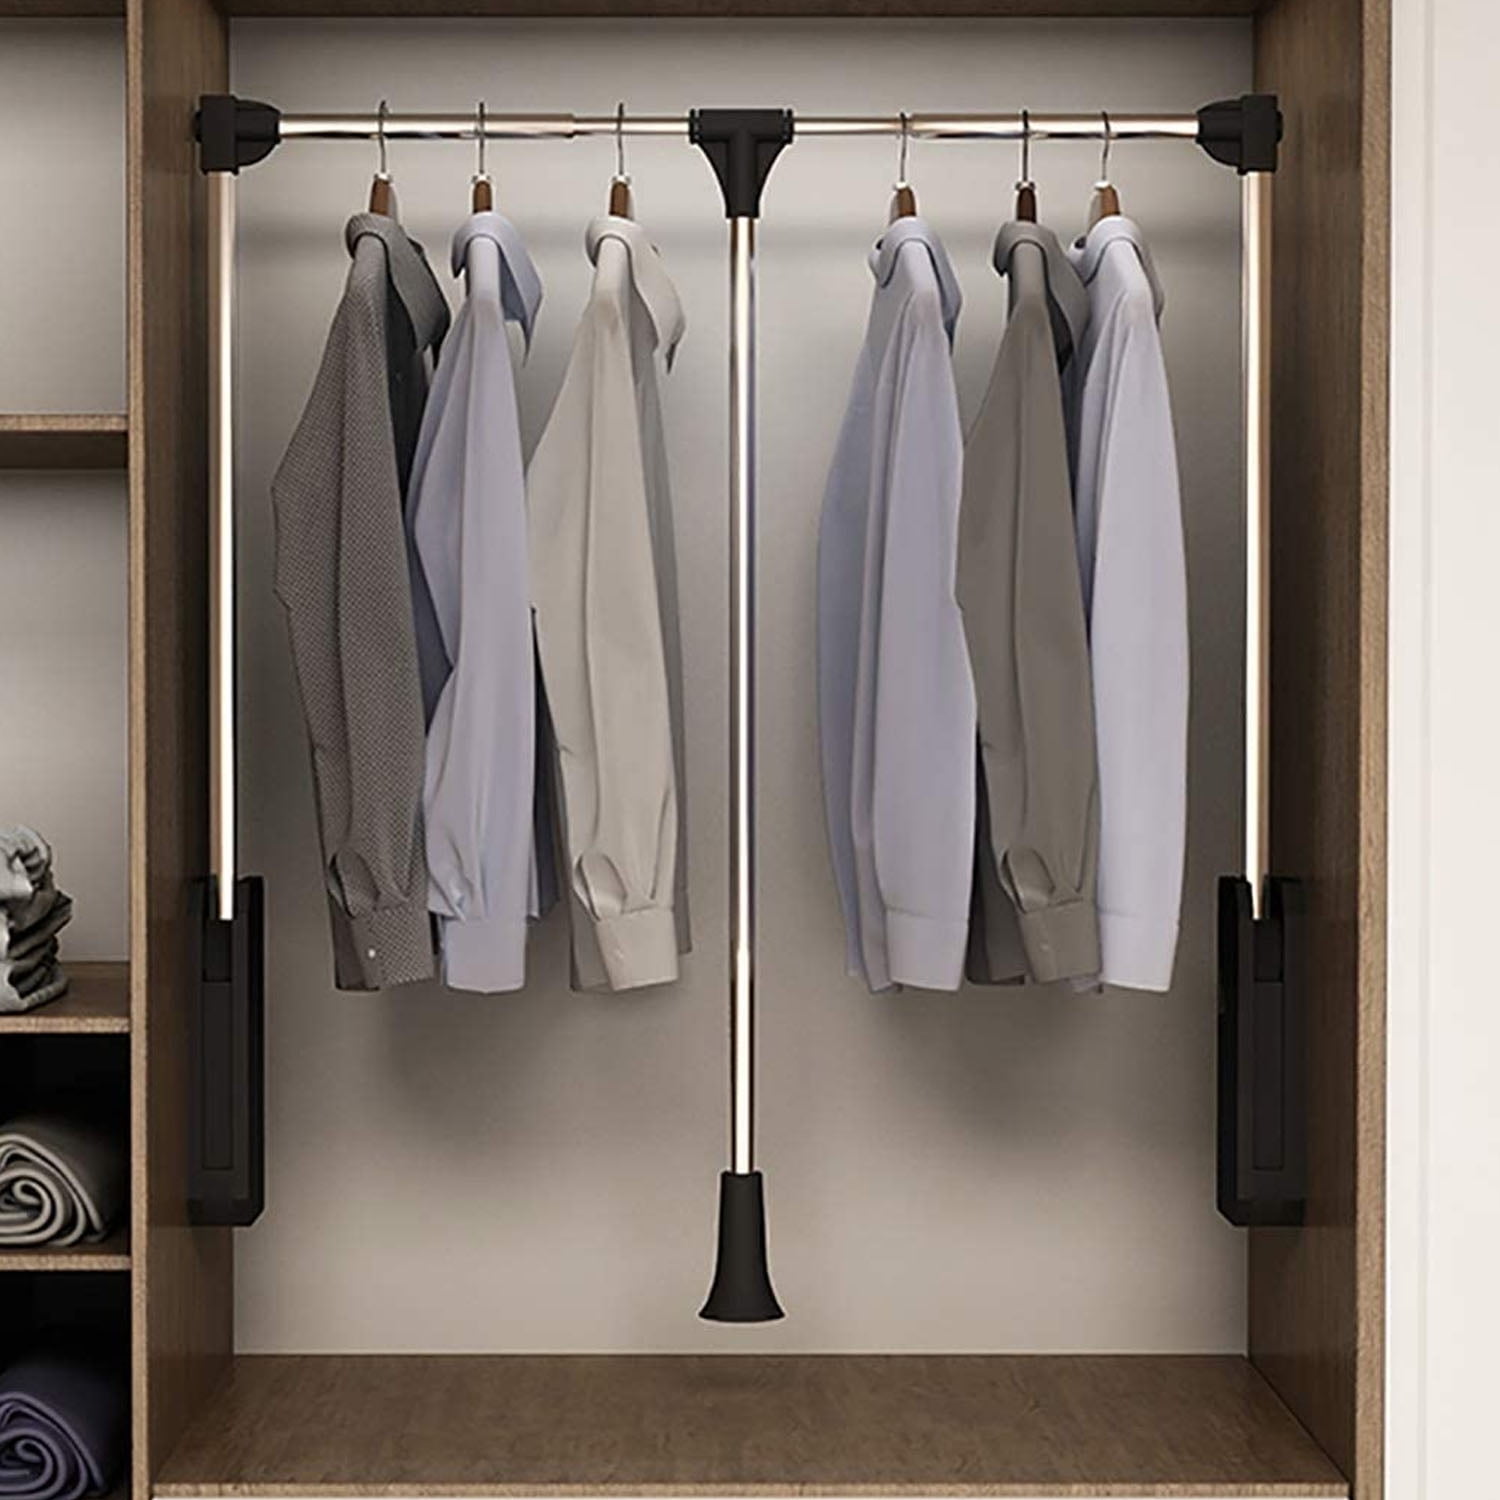 Closet Organization,Large Wardrobe Closet Storage With Lockable Wheels (2  Hanging Rods And 2 Side Hooks),47 L X 17 W X 80 H Inches,Black 